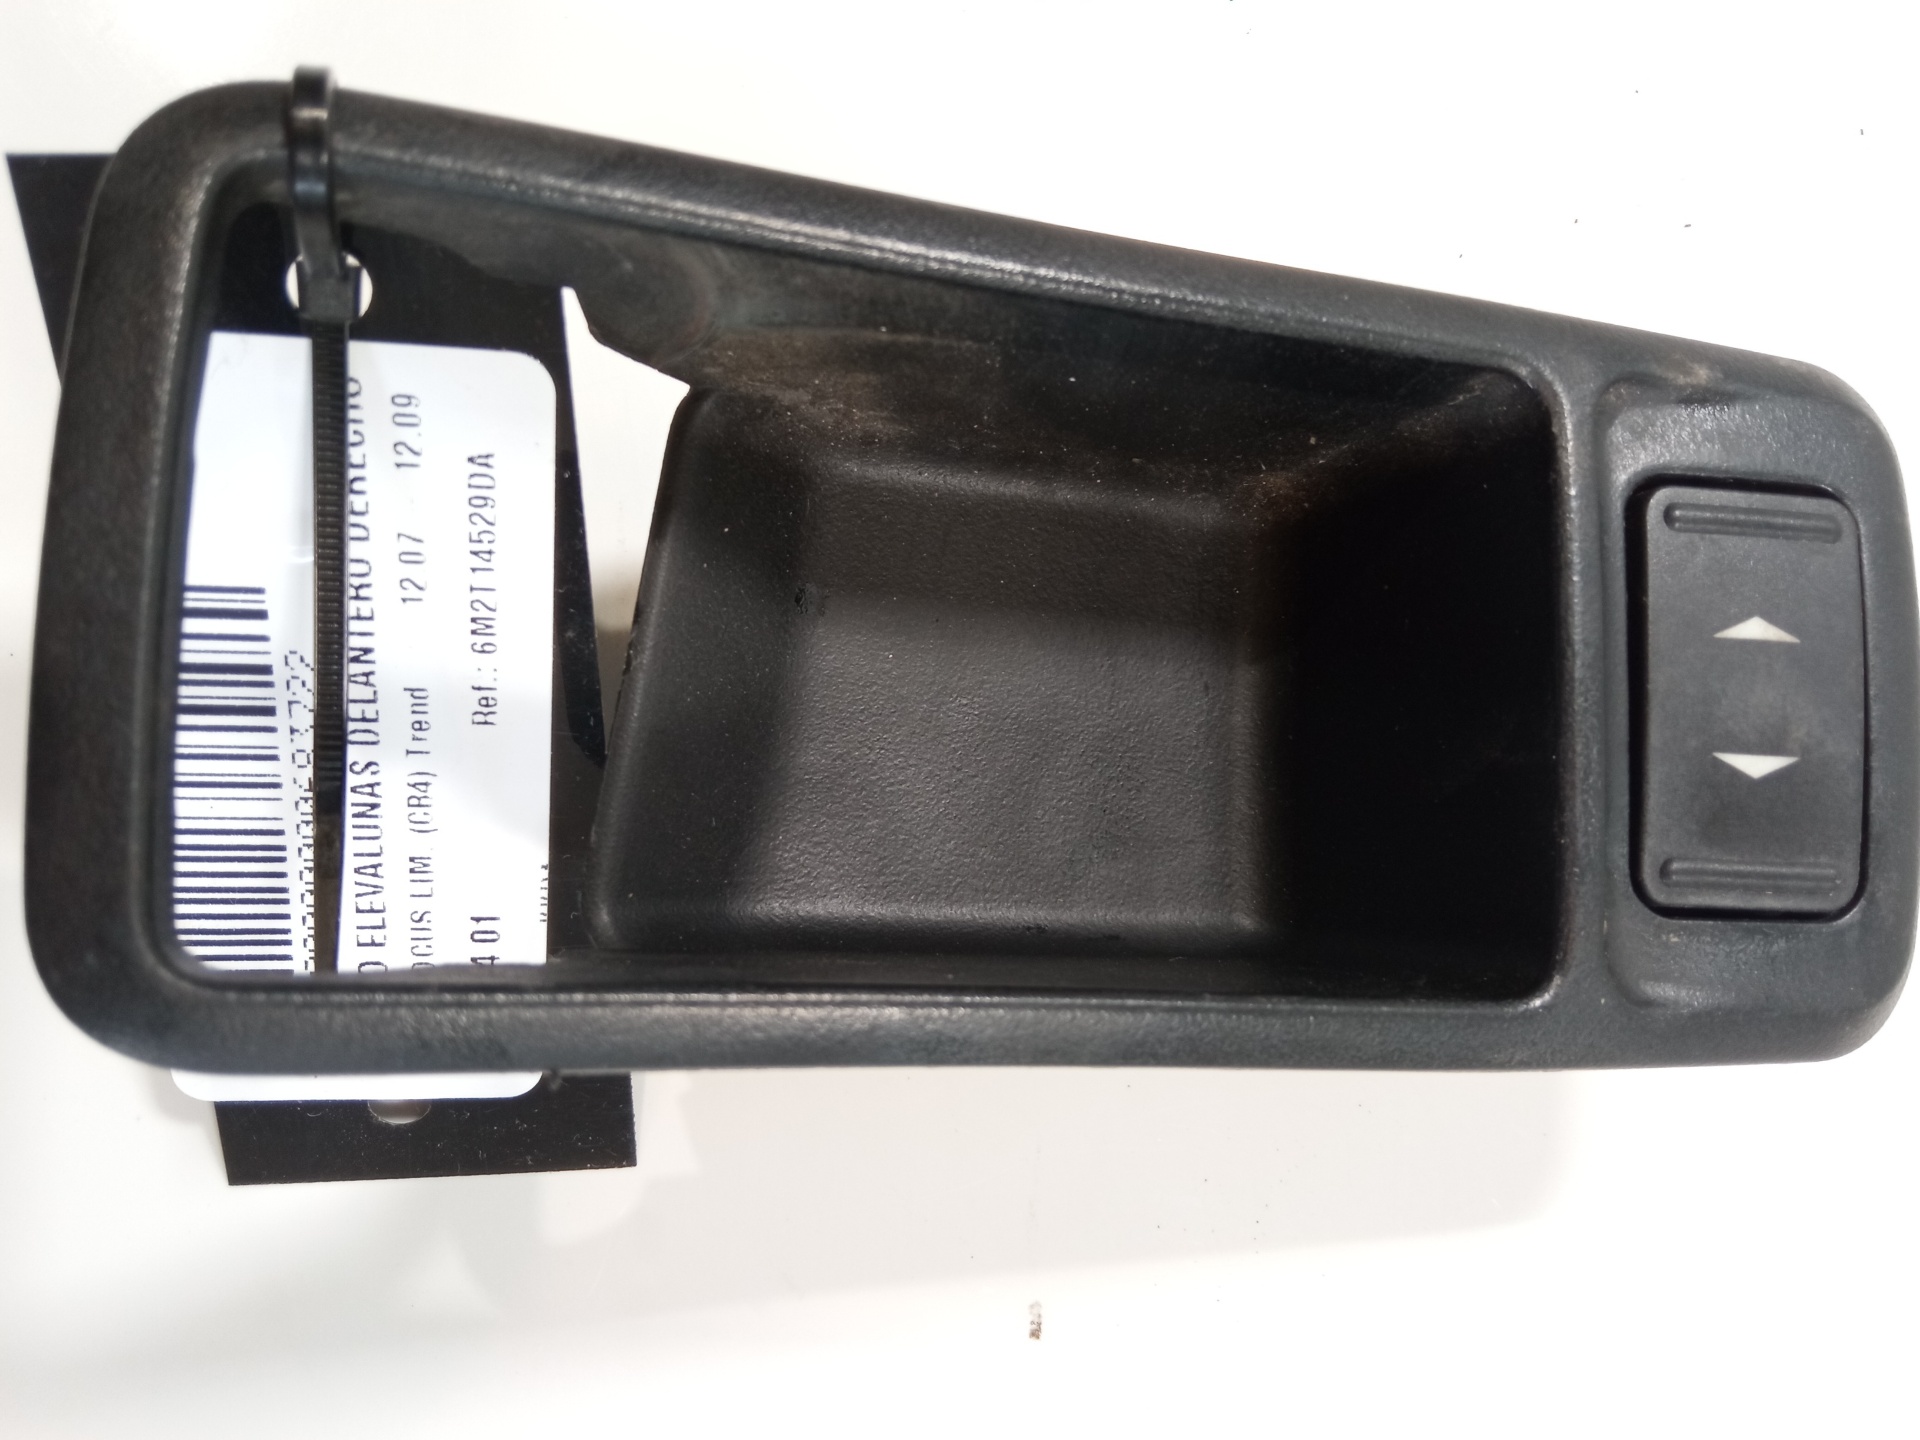 FORD Focus 2 generation (2004-2011) Front Right Door Window Switch 6M2T14529DA, 6PINES 25211254